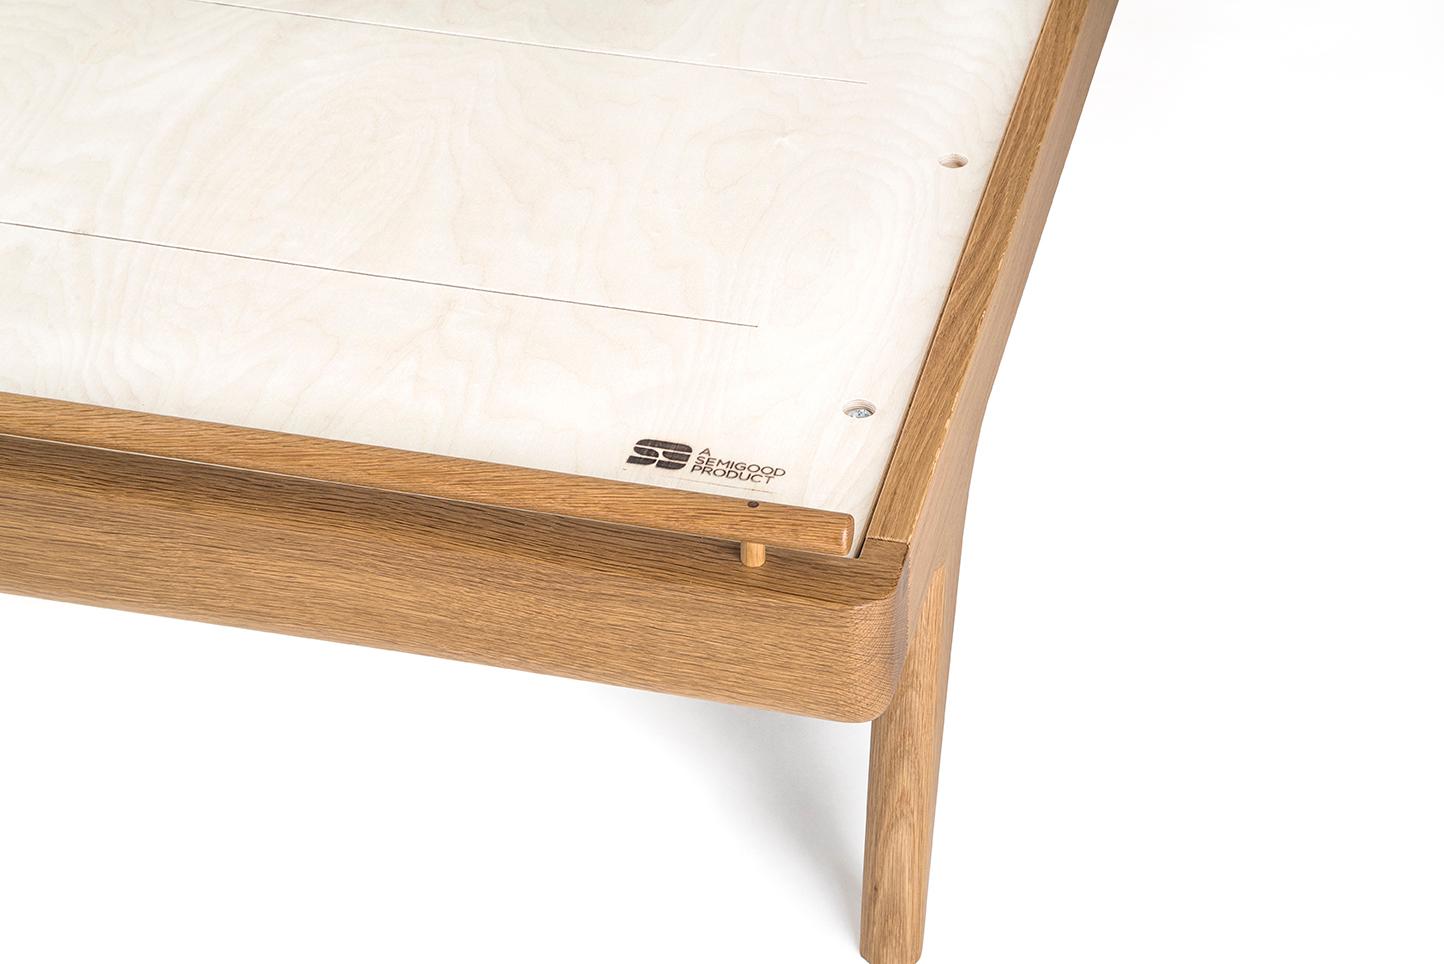 This listing is for a California King Rian bed in white Oak with Kraft Danish cord. Custom options available.

A good bed is hard to find, but a Semigood bed is hard to beat. The Rian Bed features a two panel woven Danish cord headboard making for